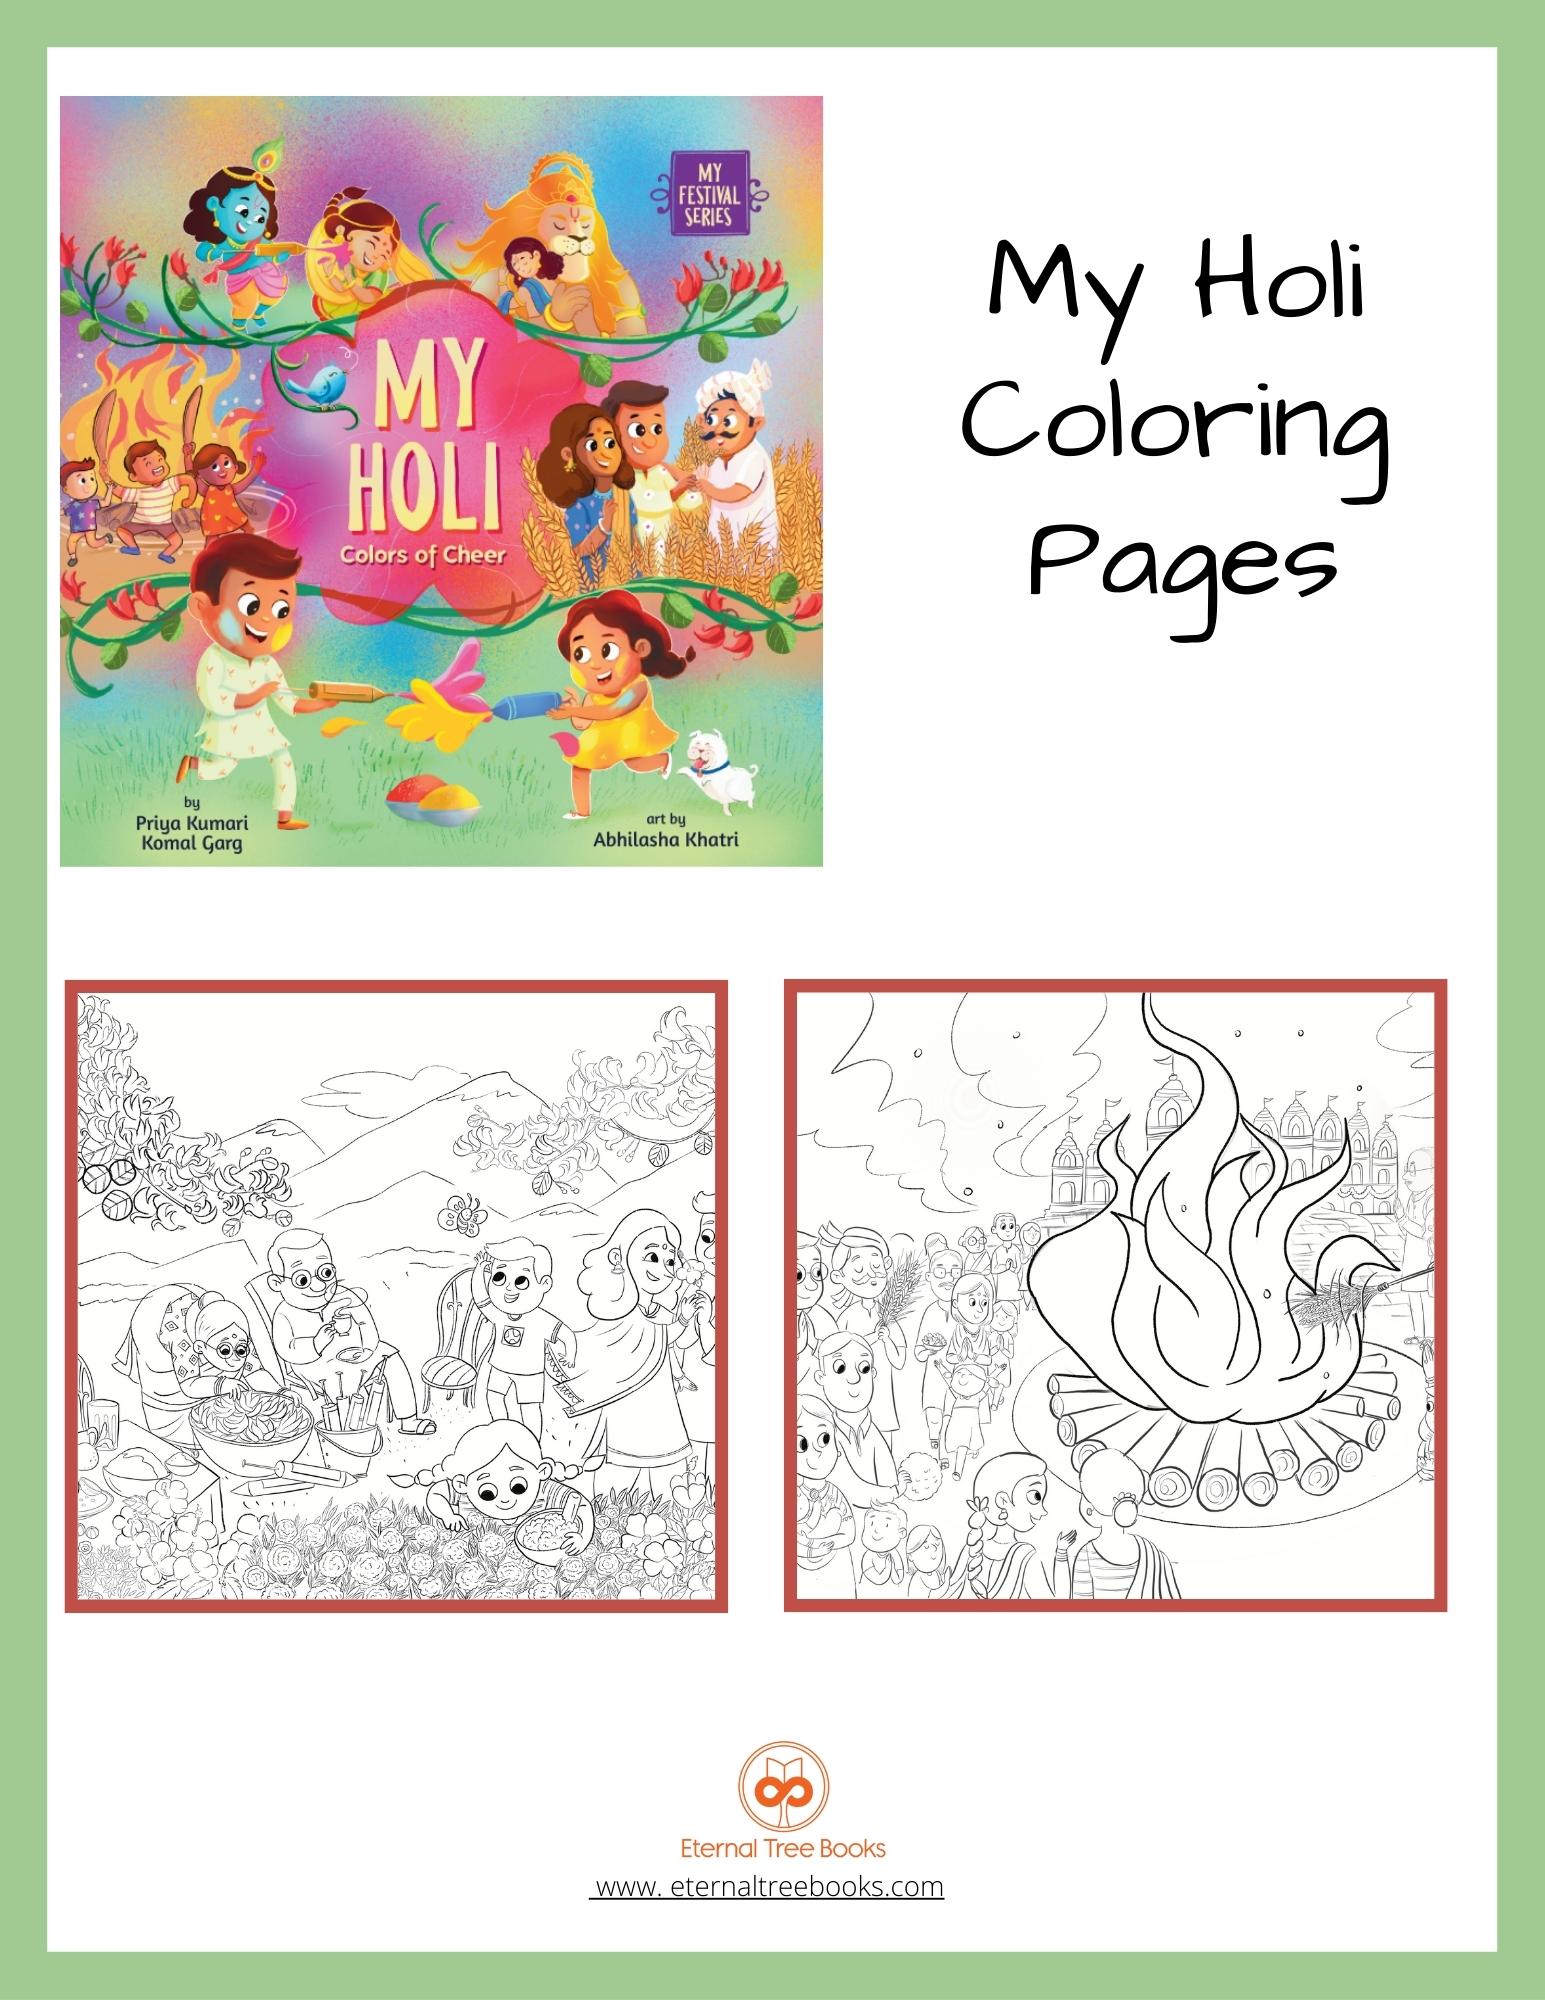 image for holi coloring pages